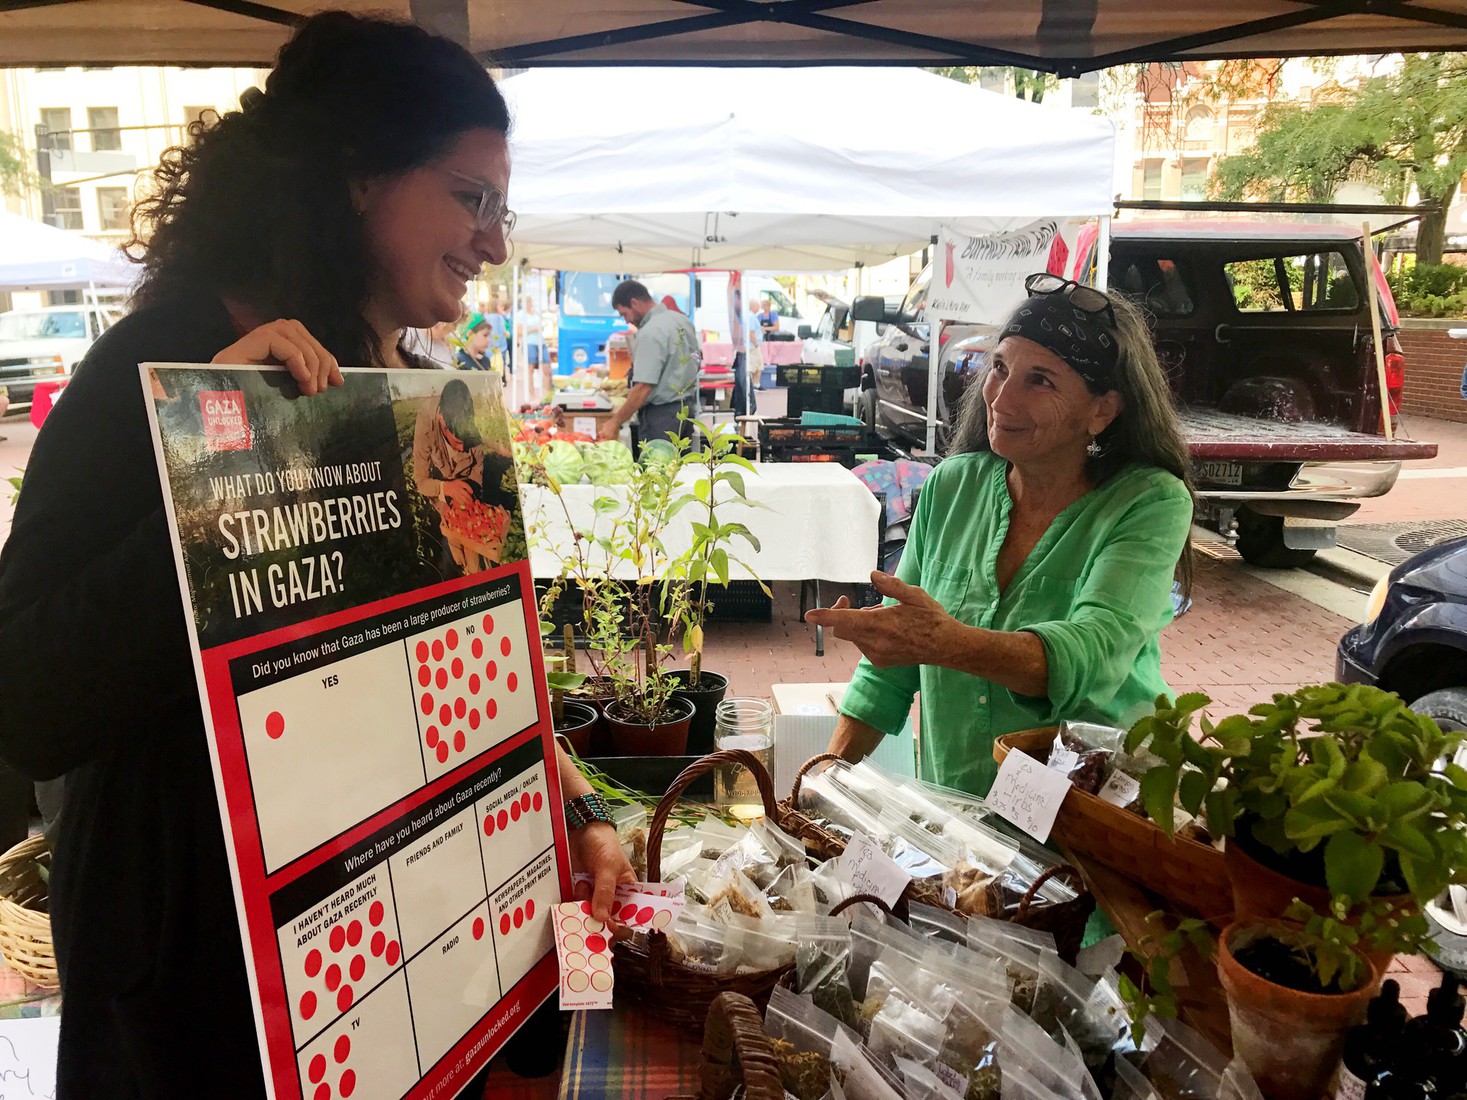 “Think of Gaza when you eat a strawberry”: Lessons on engagement from U.S. farmer’s markets 